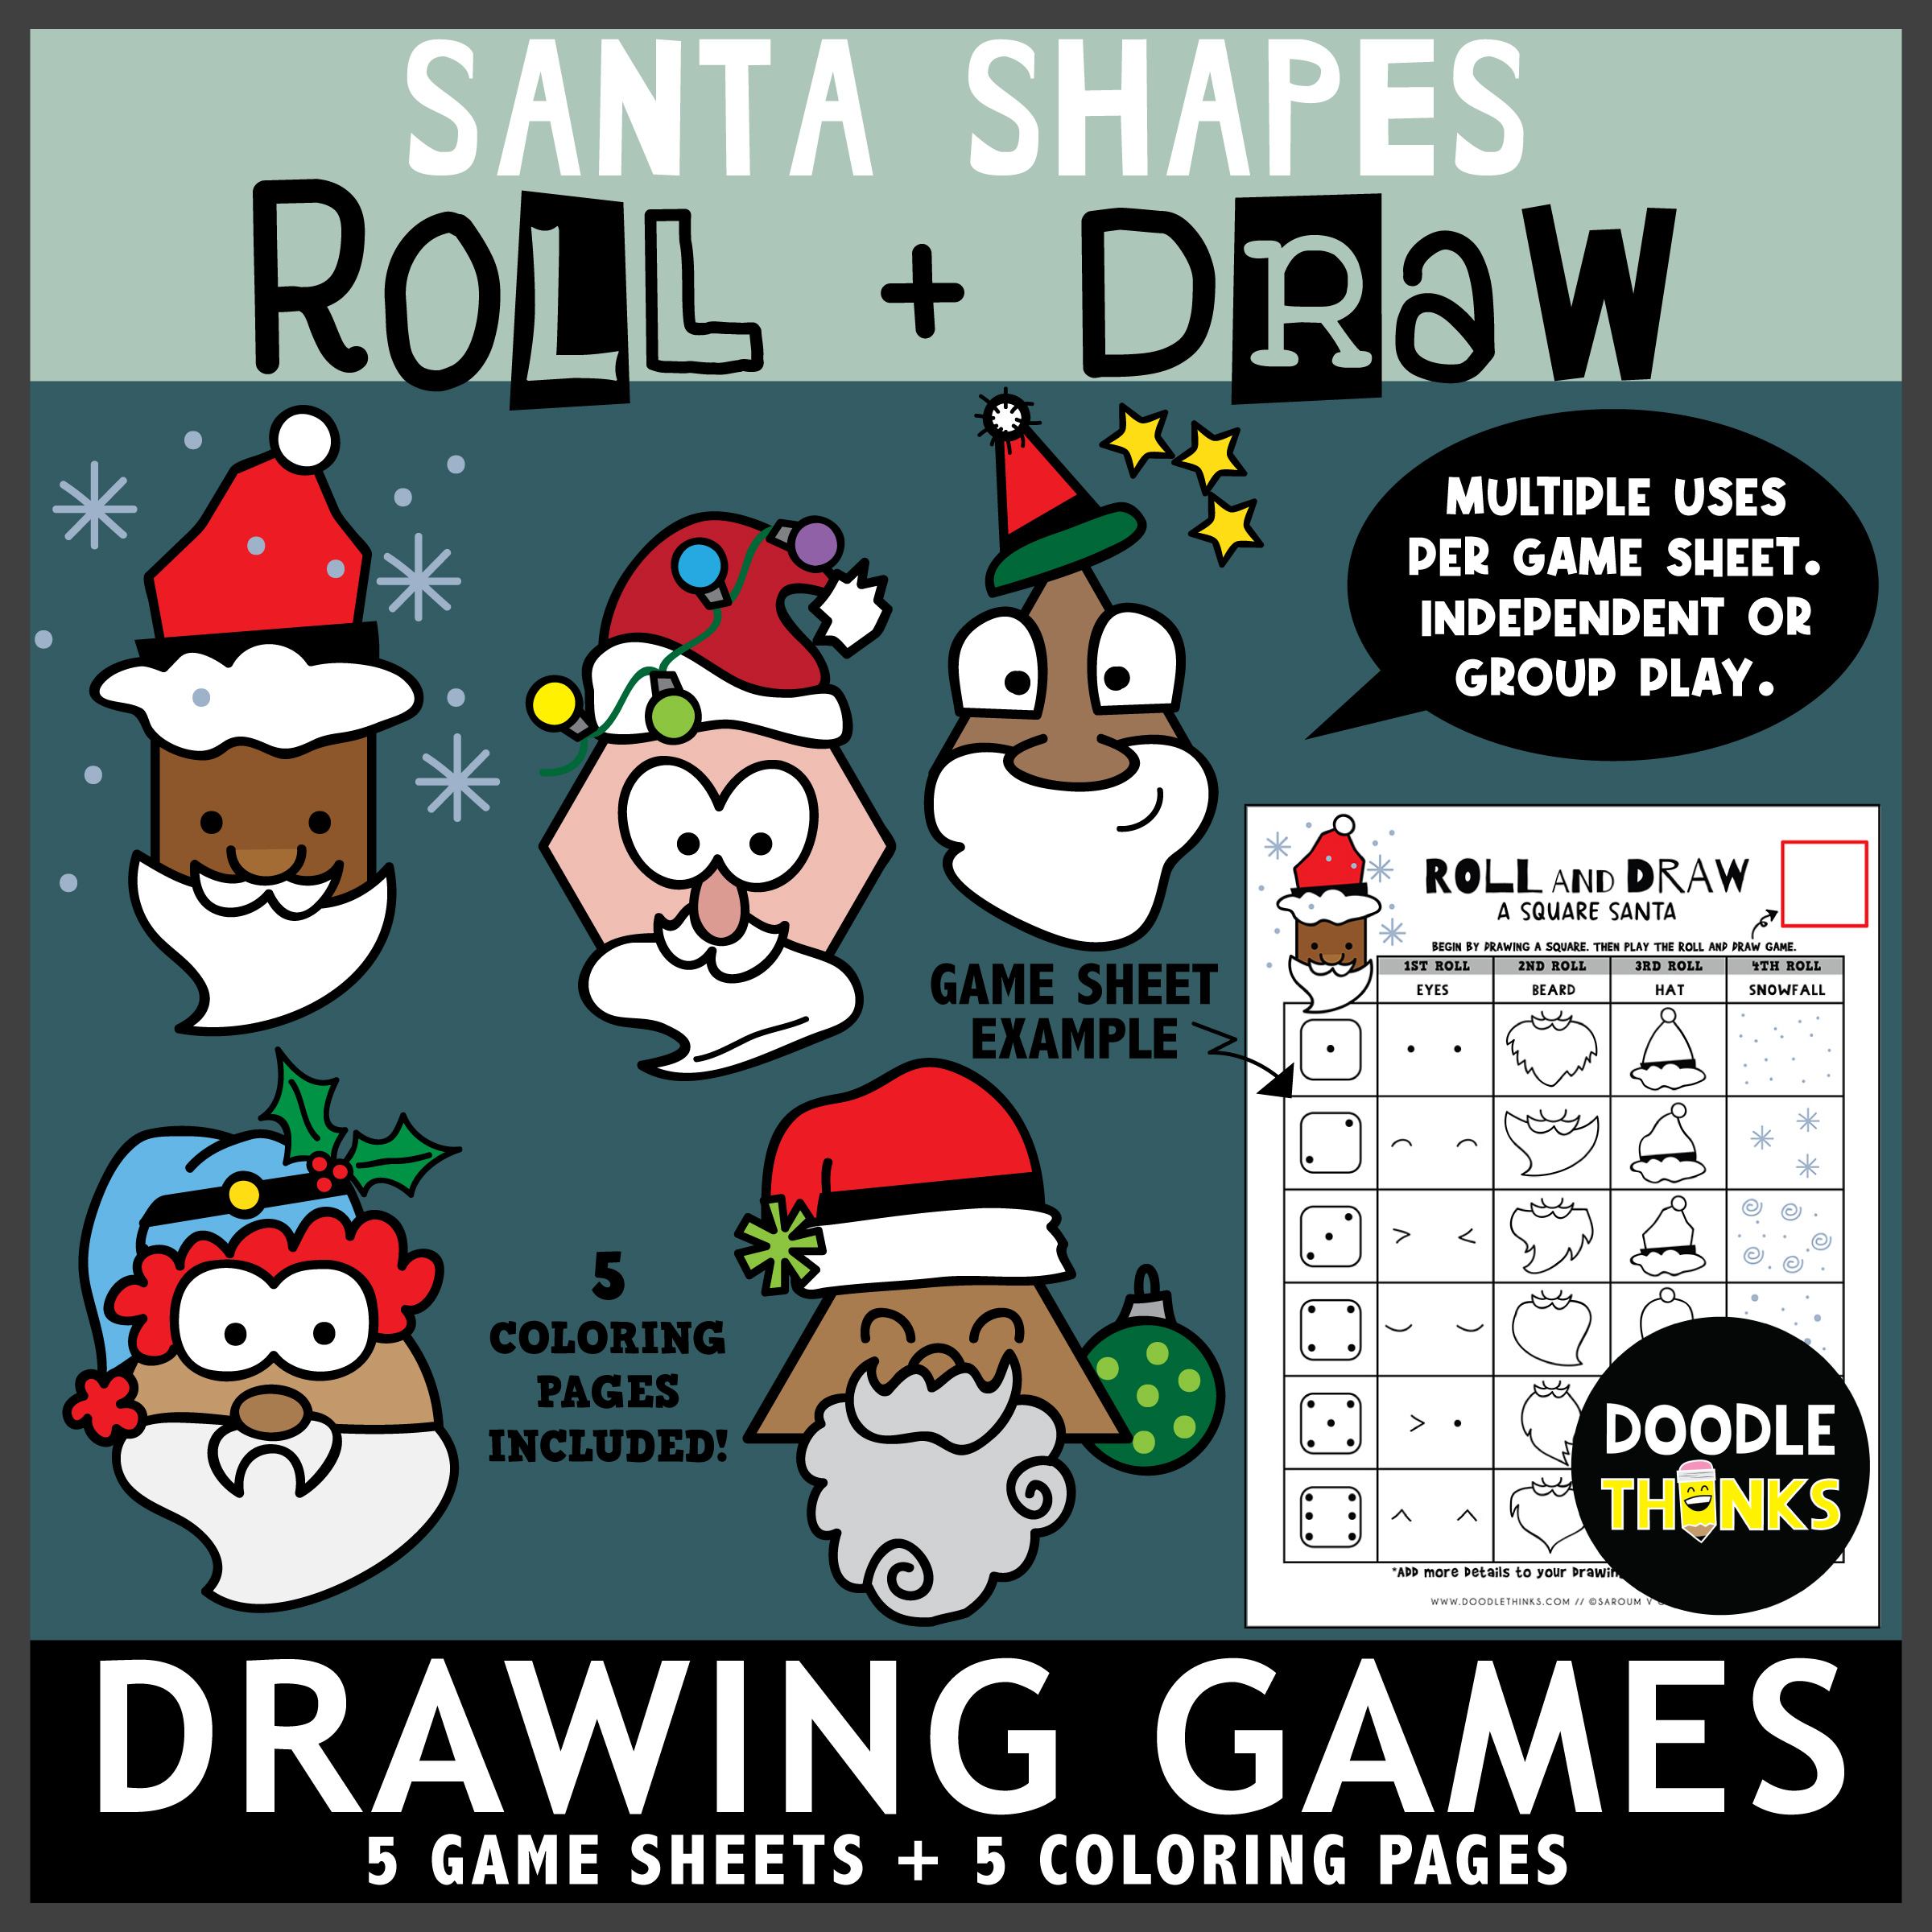 Santa shapes roll and draw game coloring sheets no prep activities made by teachers